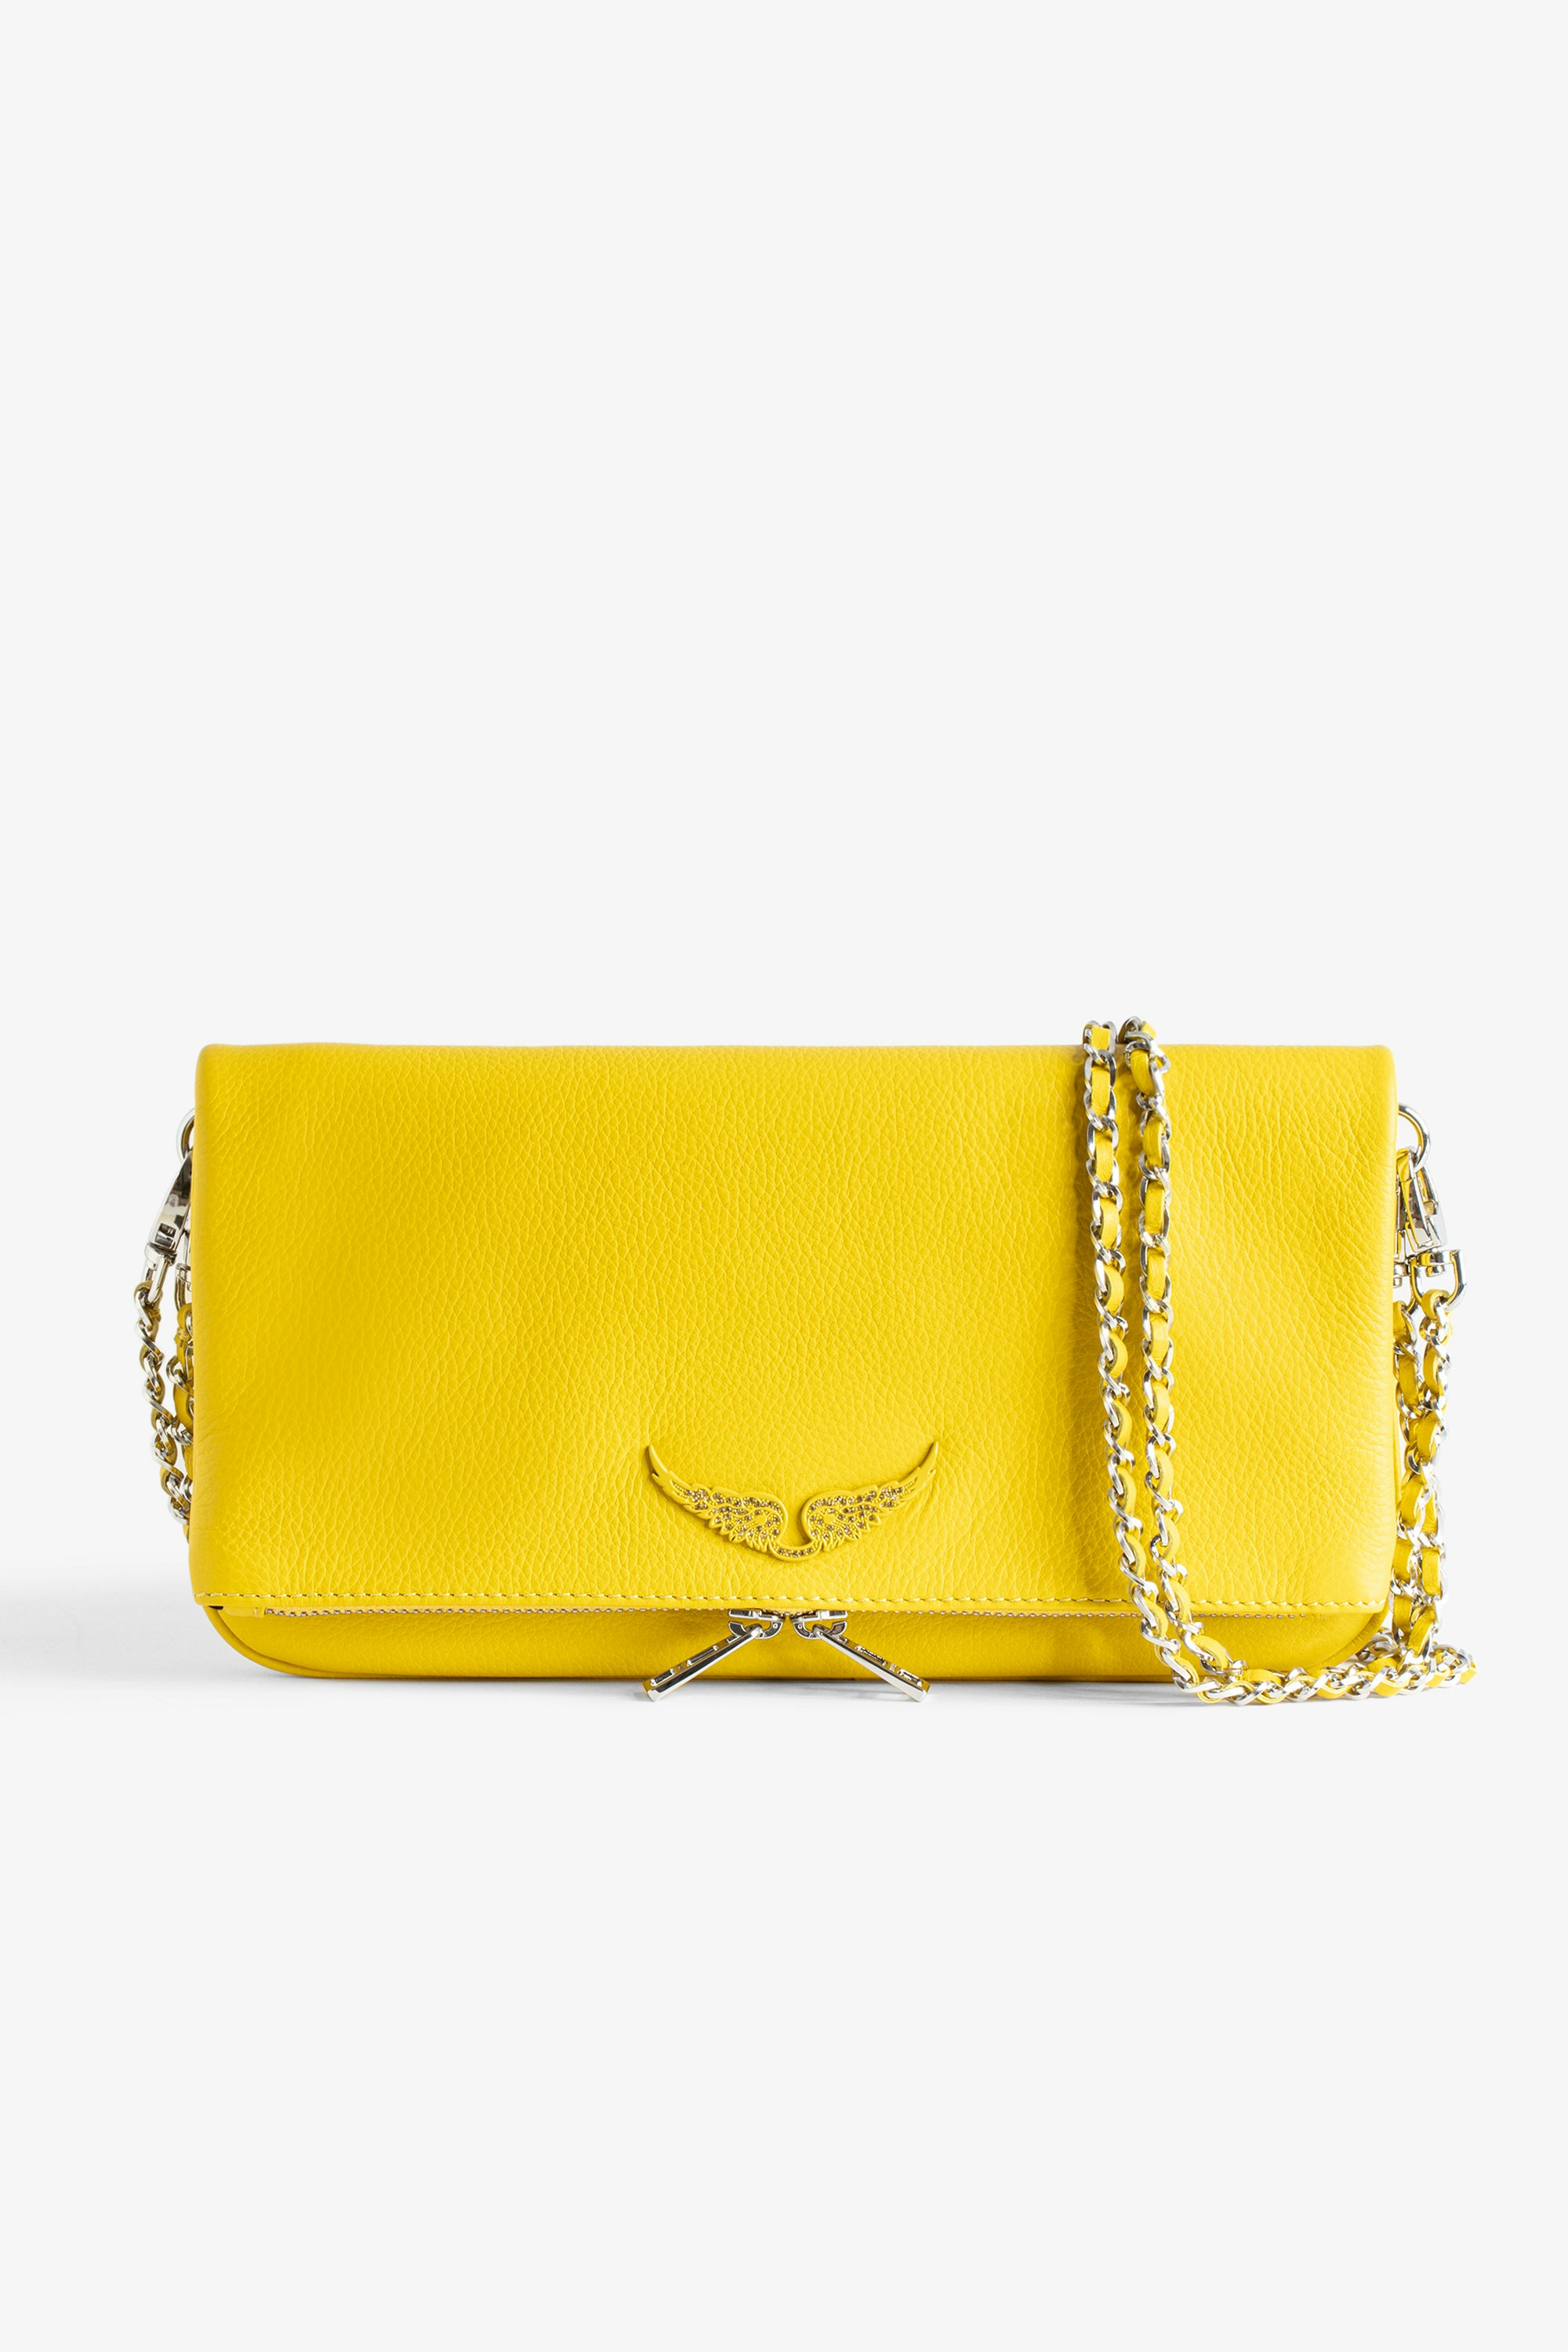 Rock Clutch - Women’s yellow grained leather clutch with double leather and metal chain strap.